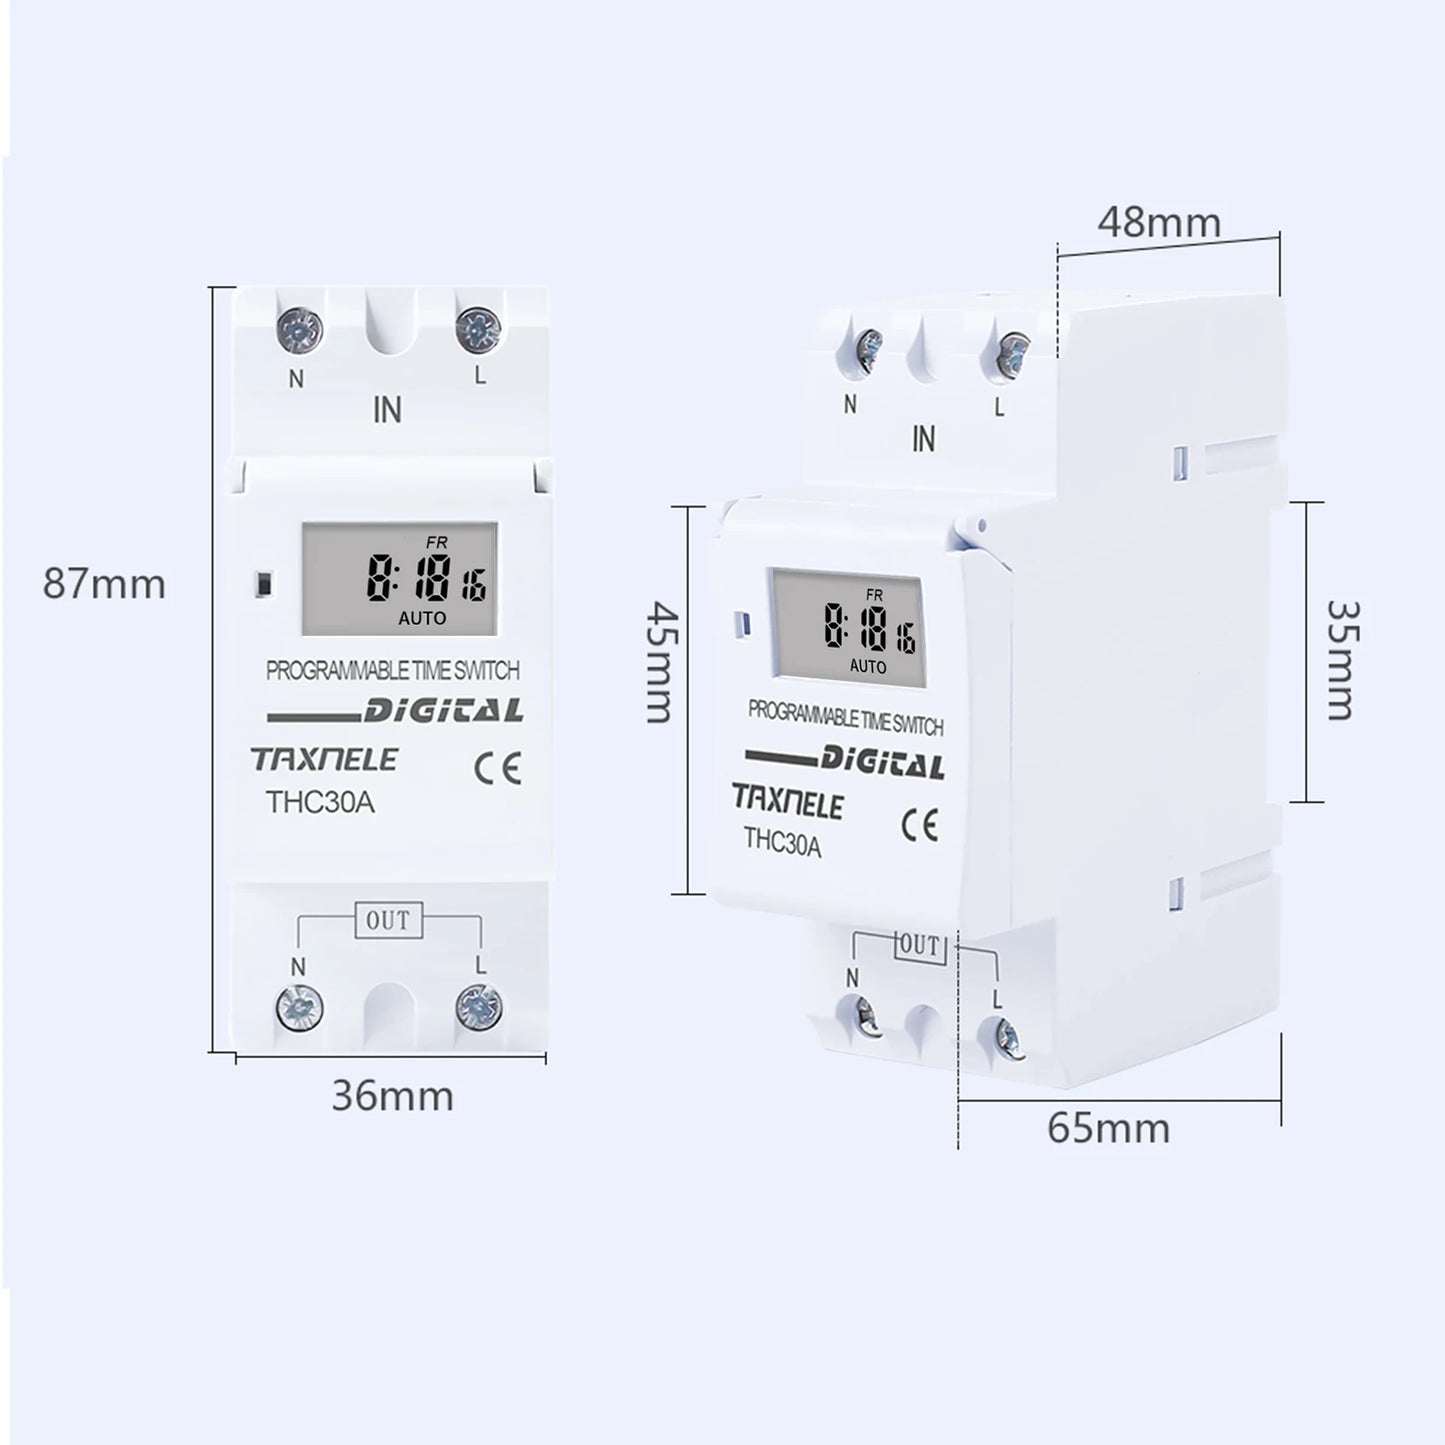 New type Din Rail 2 wire Weekly 7 Days Programmable Digital TIME SWITCH Relay Timer Control AC/DC 12V 24V 48V 16A 30A